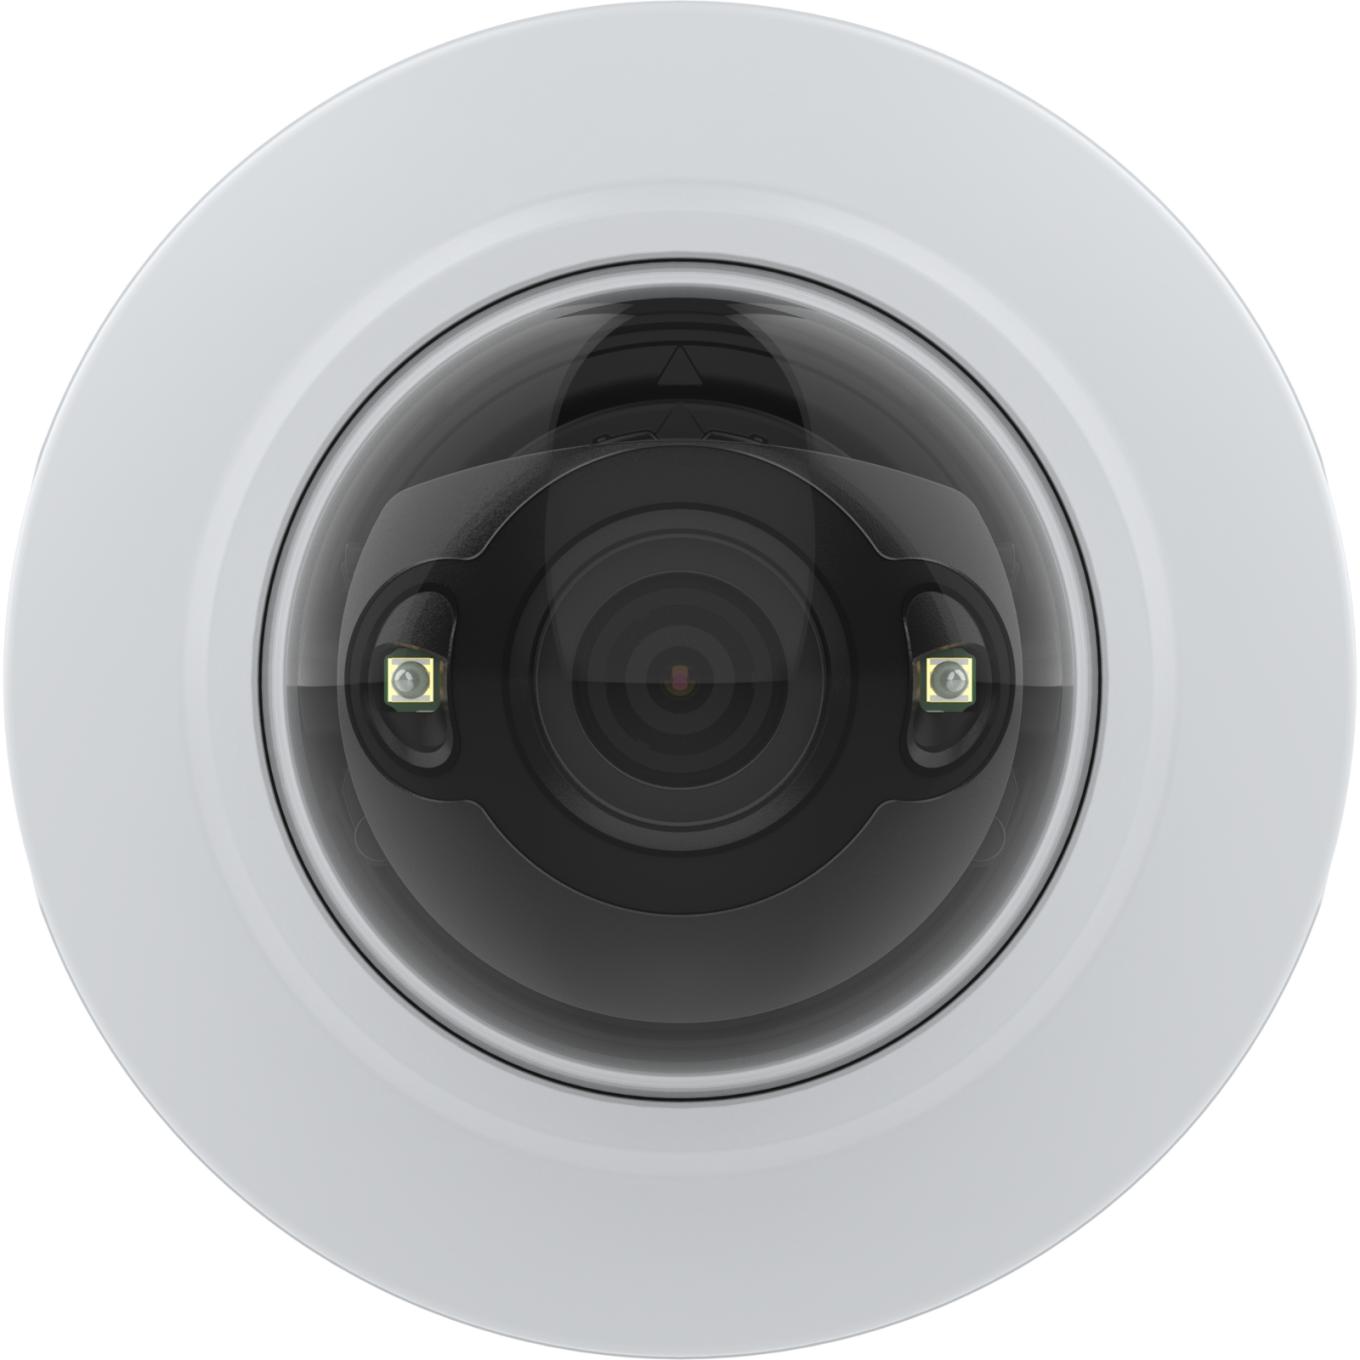 AXIS M4218-LV Dome Camera, wall, viewed from its front